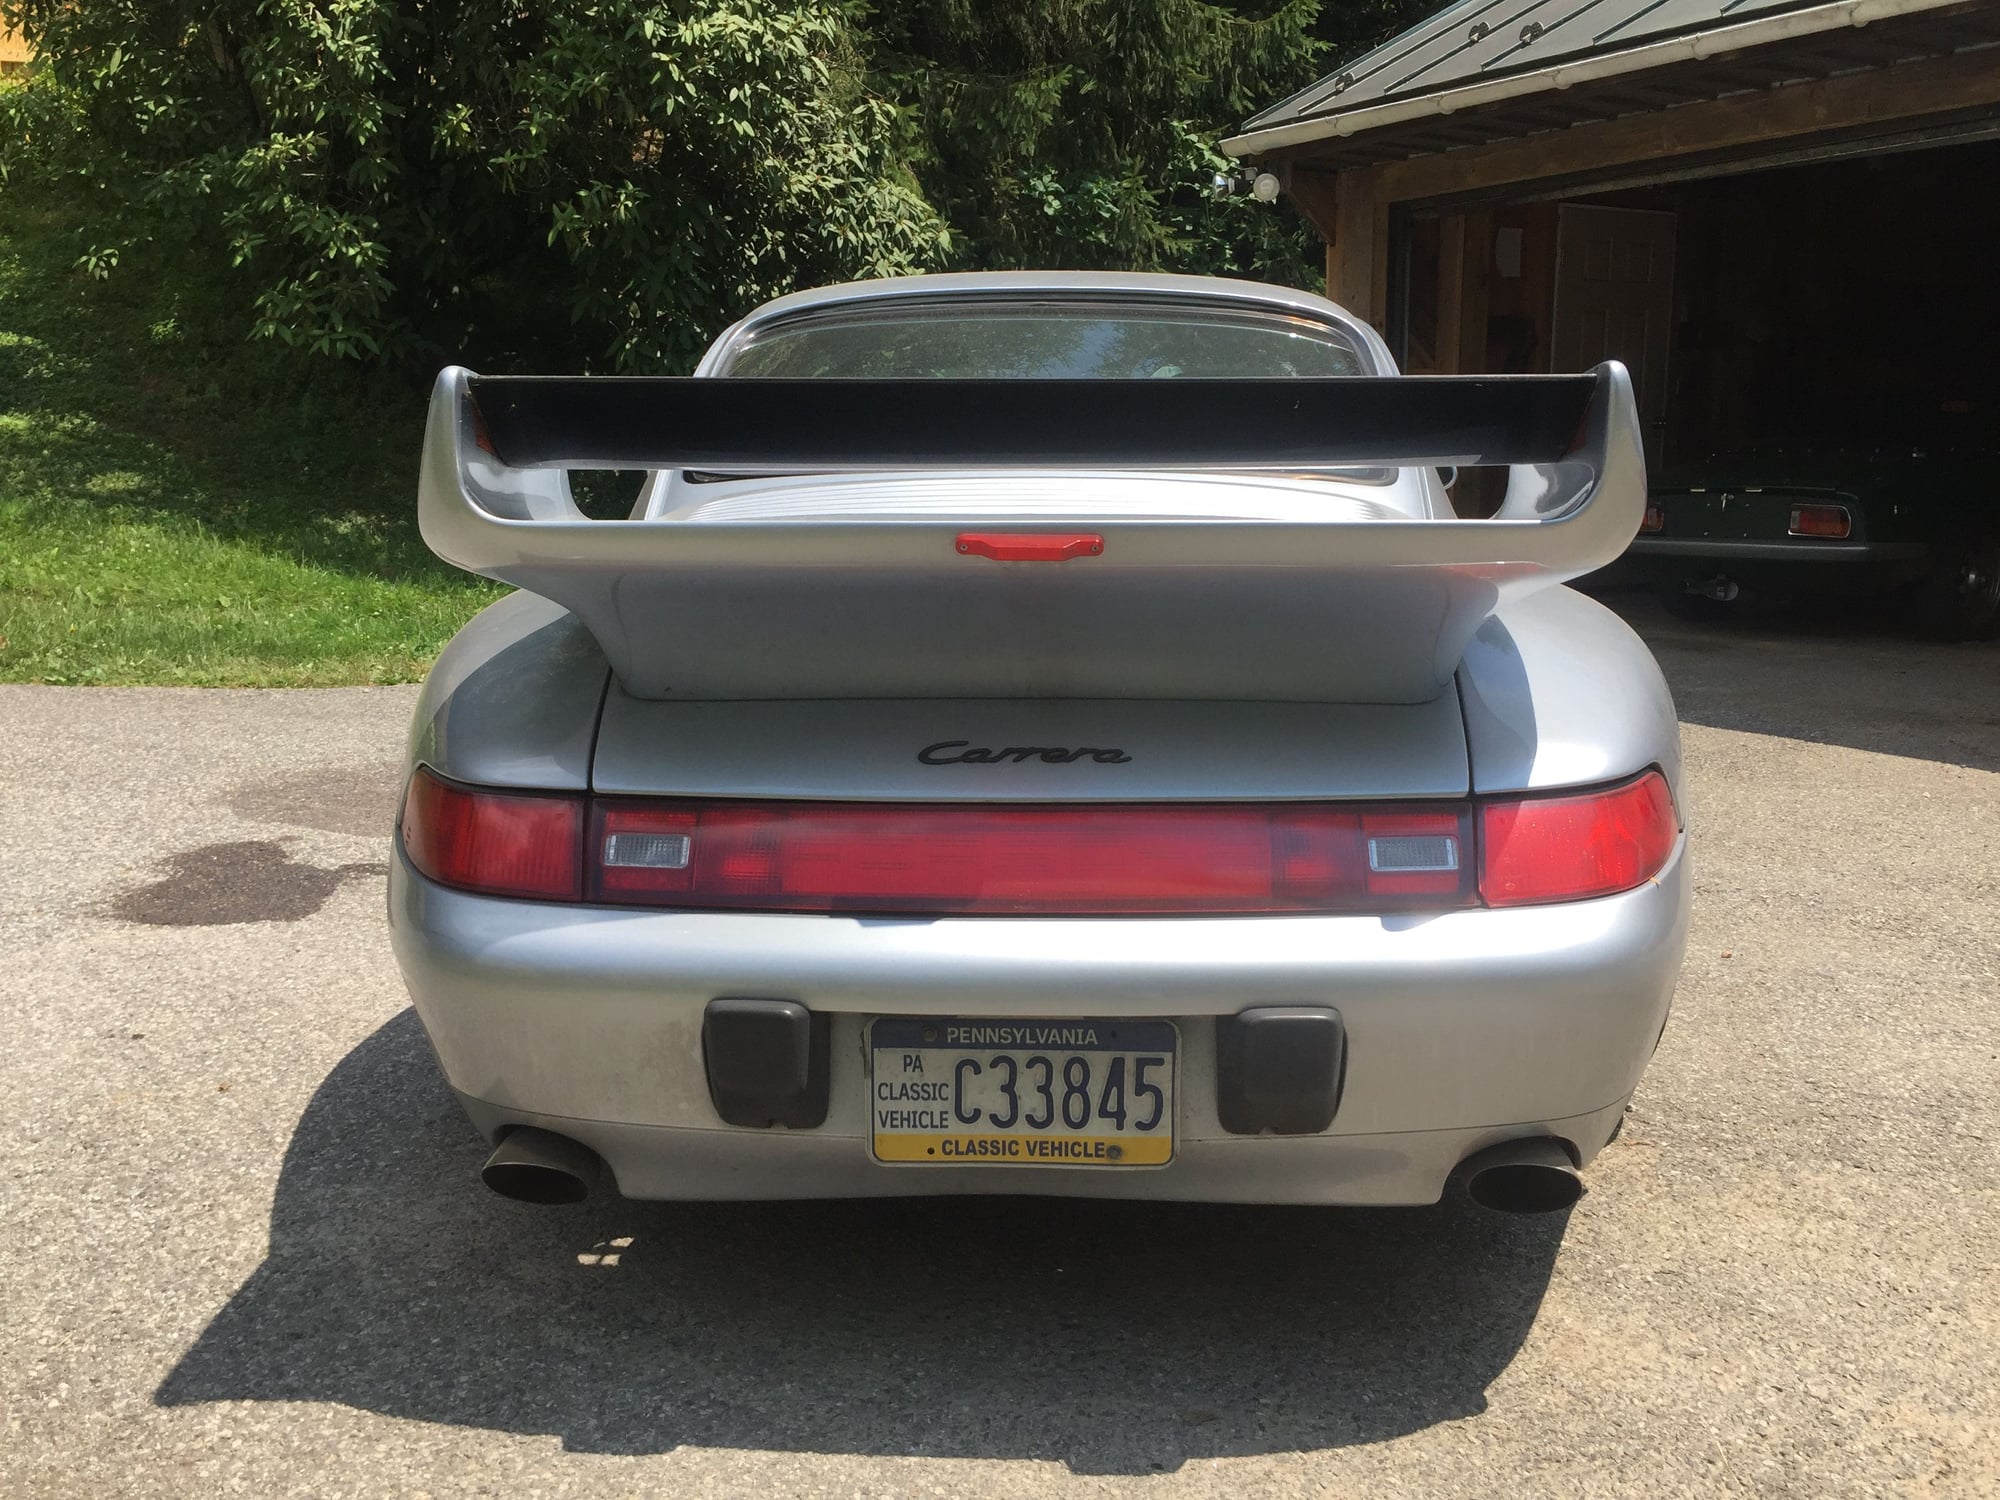 1995 Porsche 911 - Porsche 993 Carrera street and track car - Used - VIN WP0AA2995SS320775 - 57,127 Miles - 6 cyl - 2WD - Manual - Coupe - Silver - Cochranville, PA 19330, United States